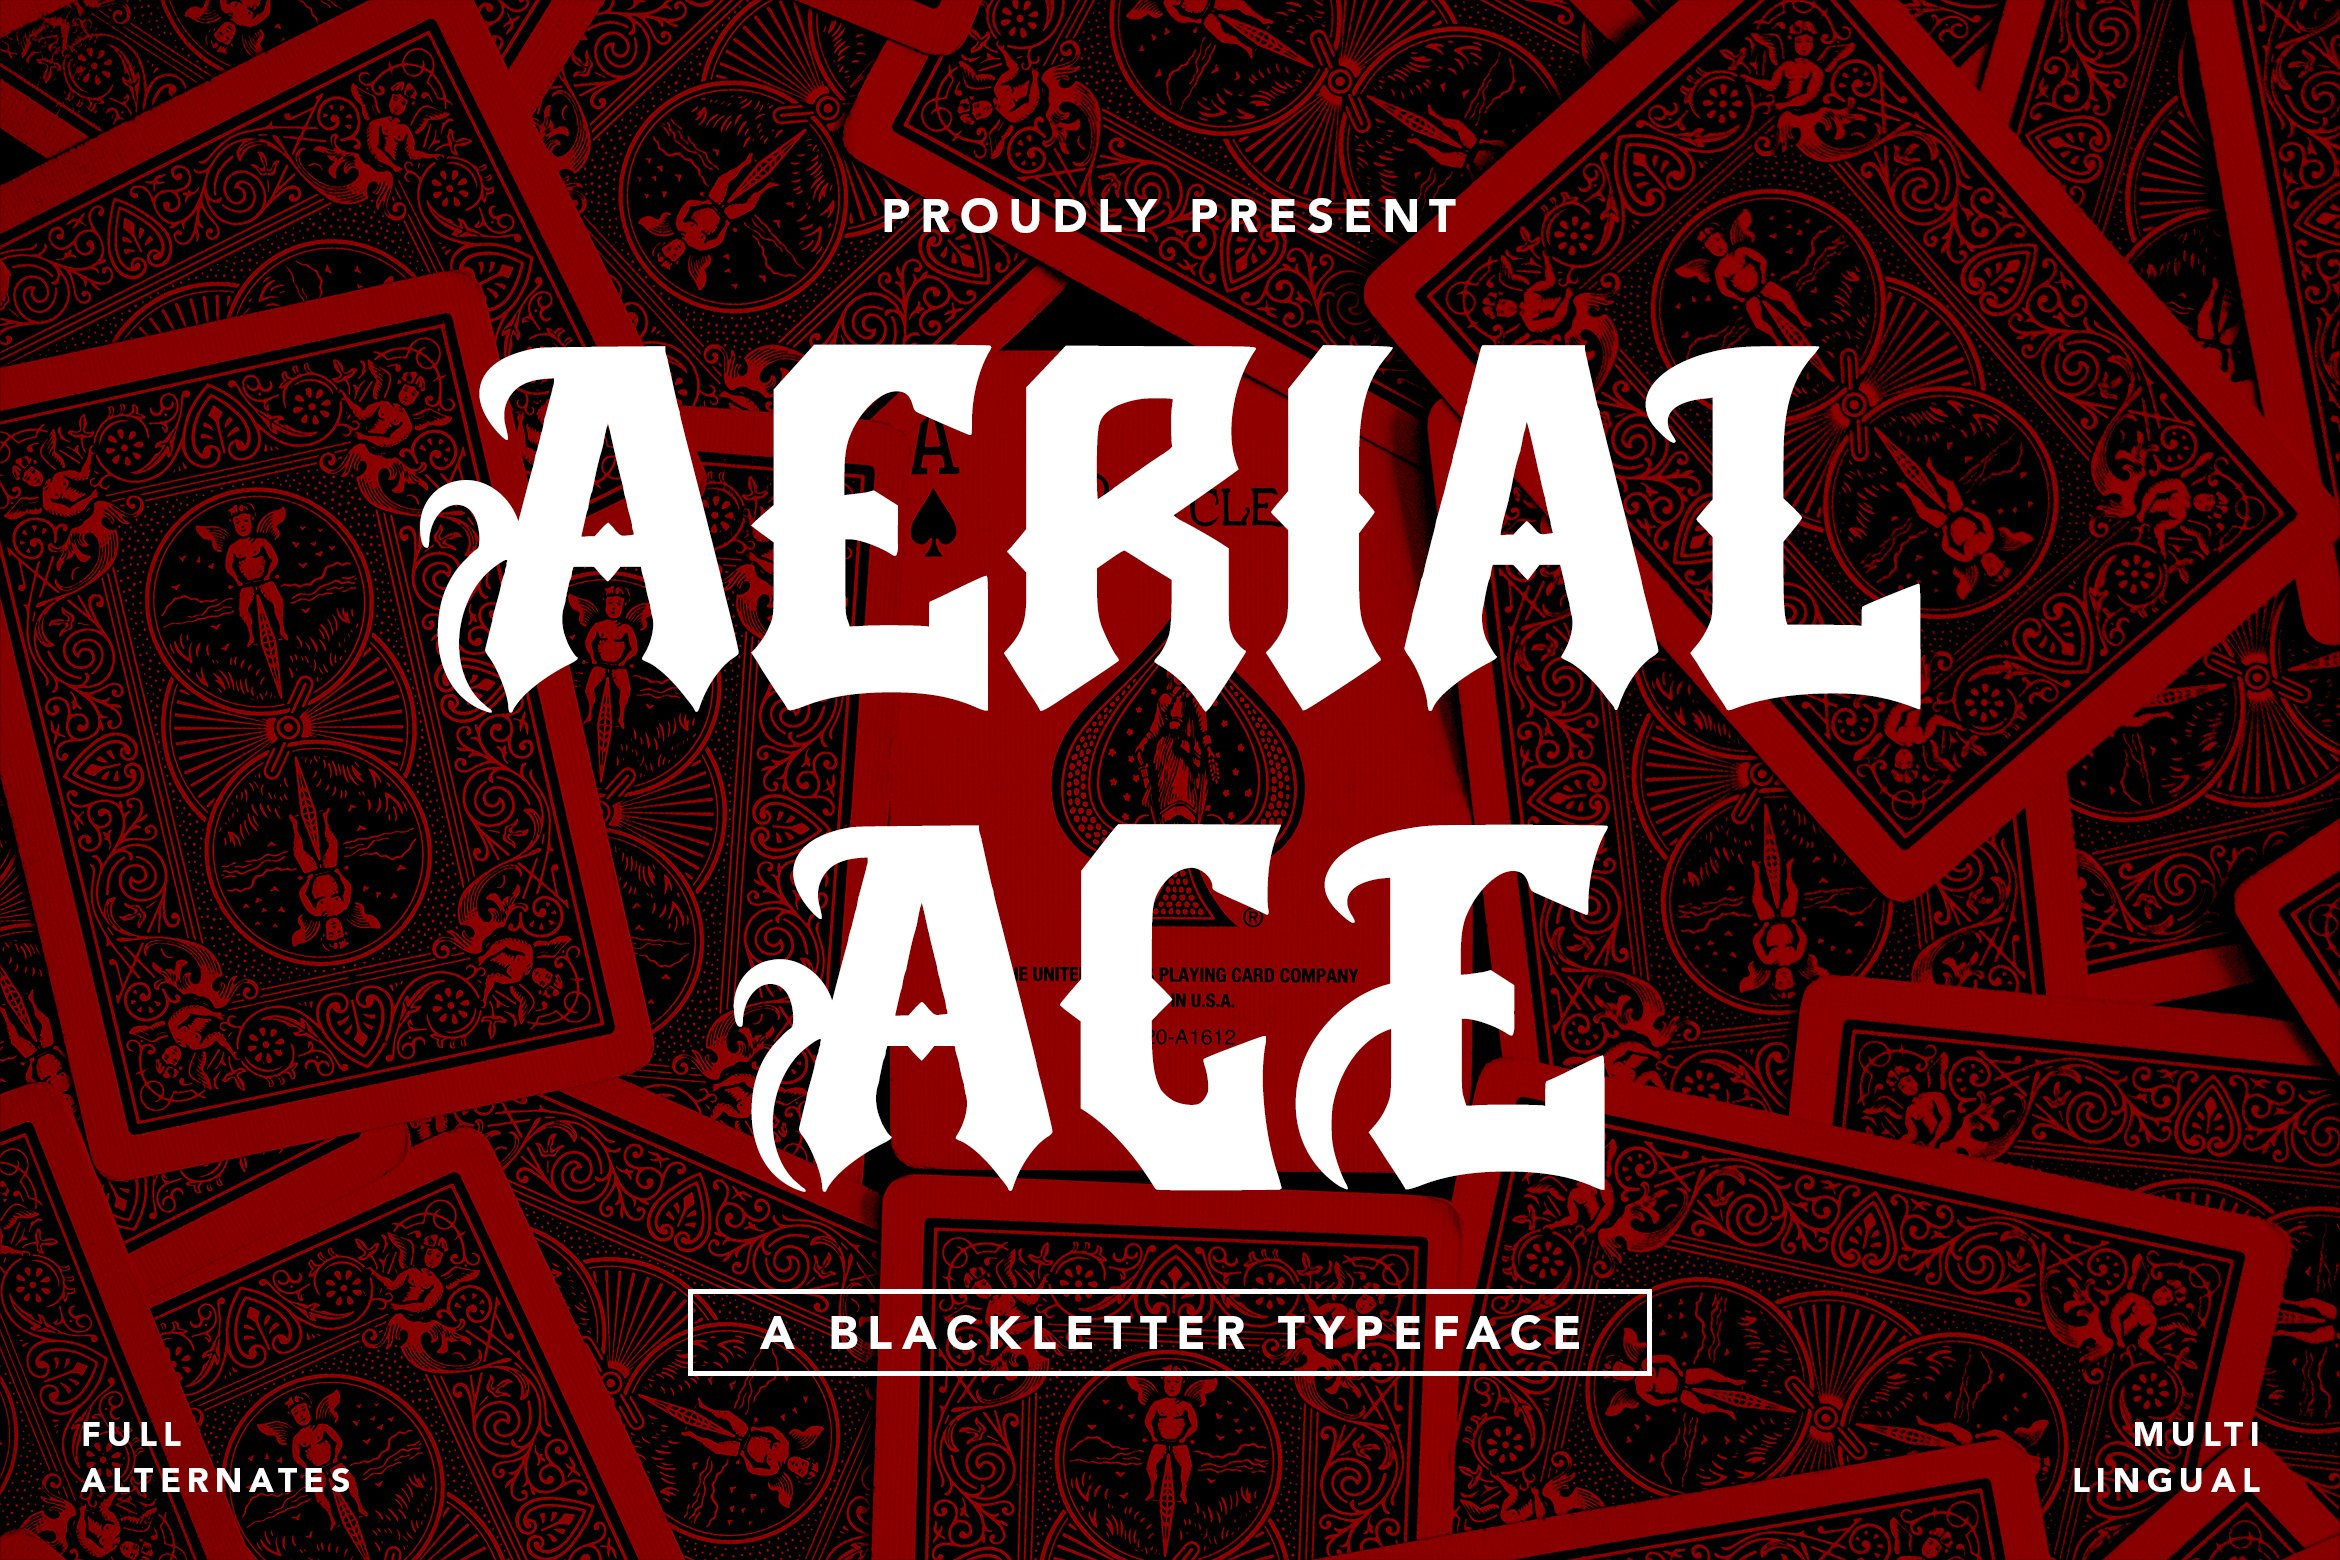 AerialAce- Blackletter Typeface Font cover image.